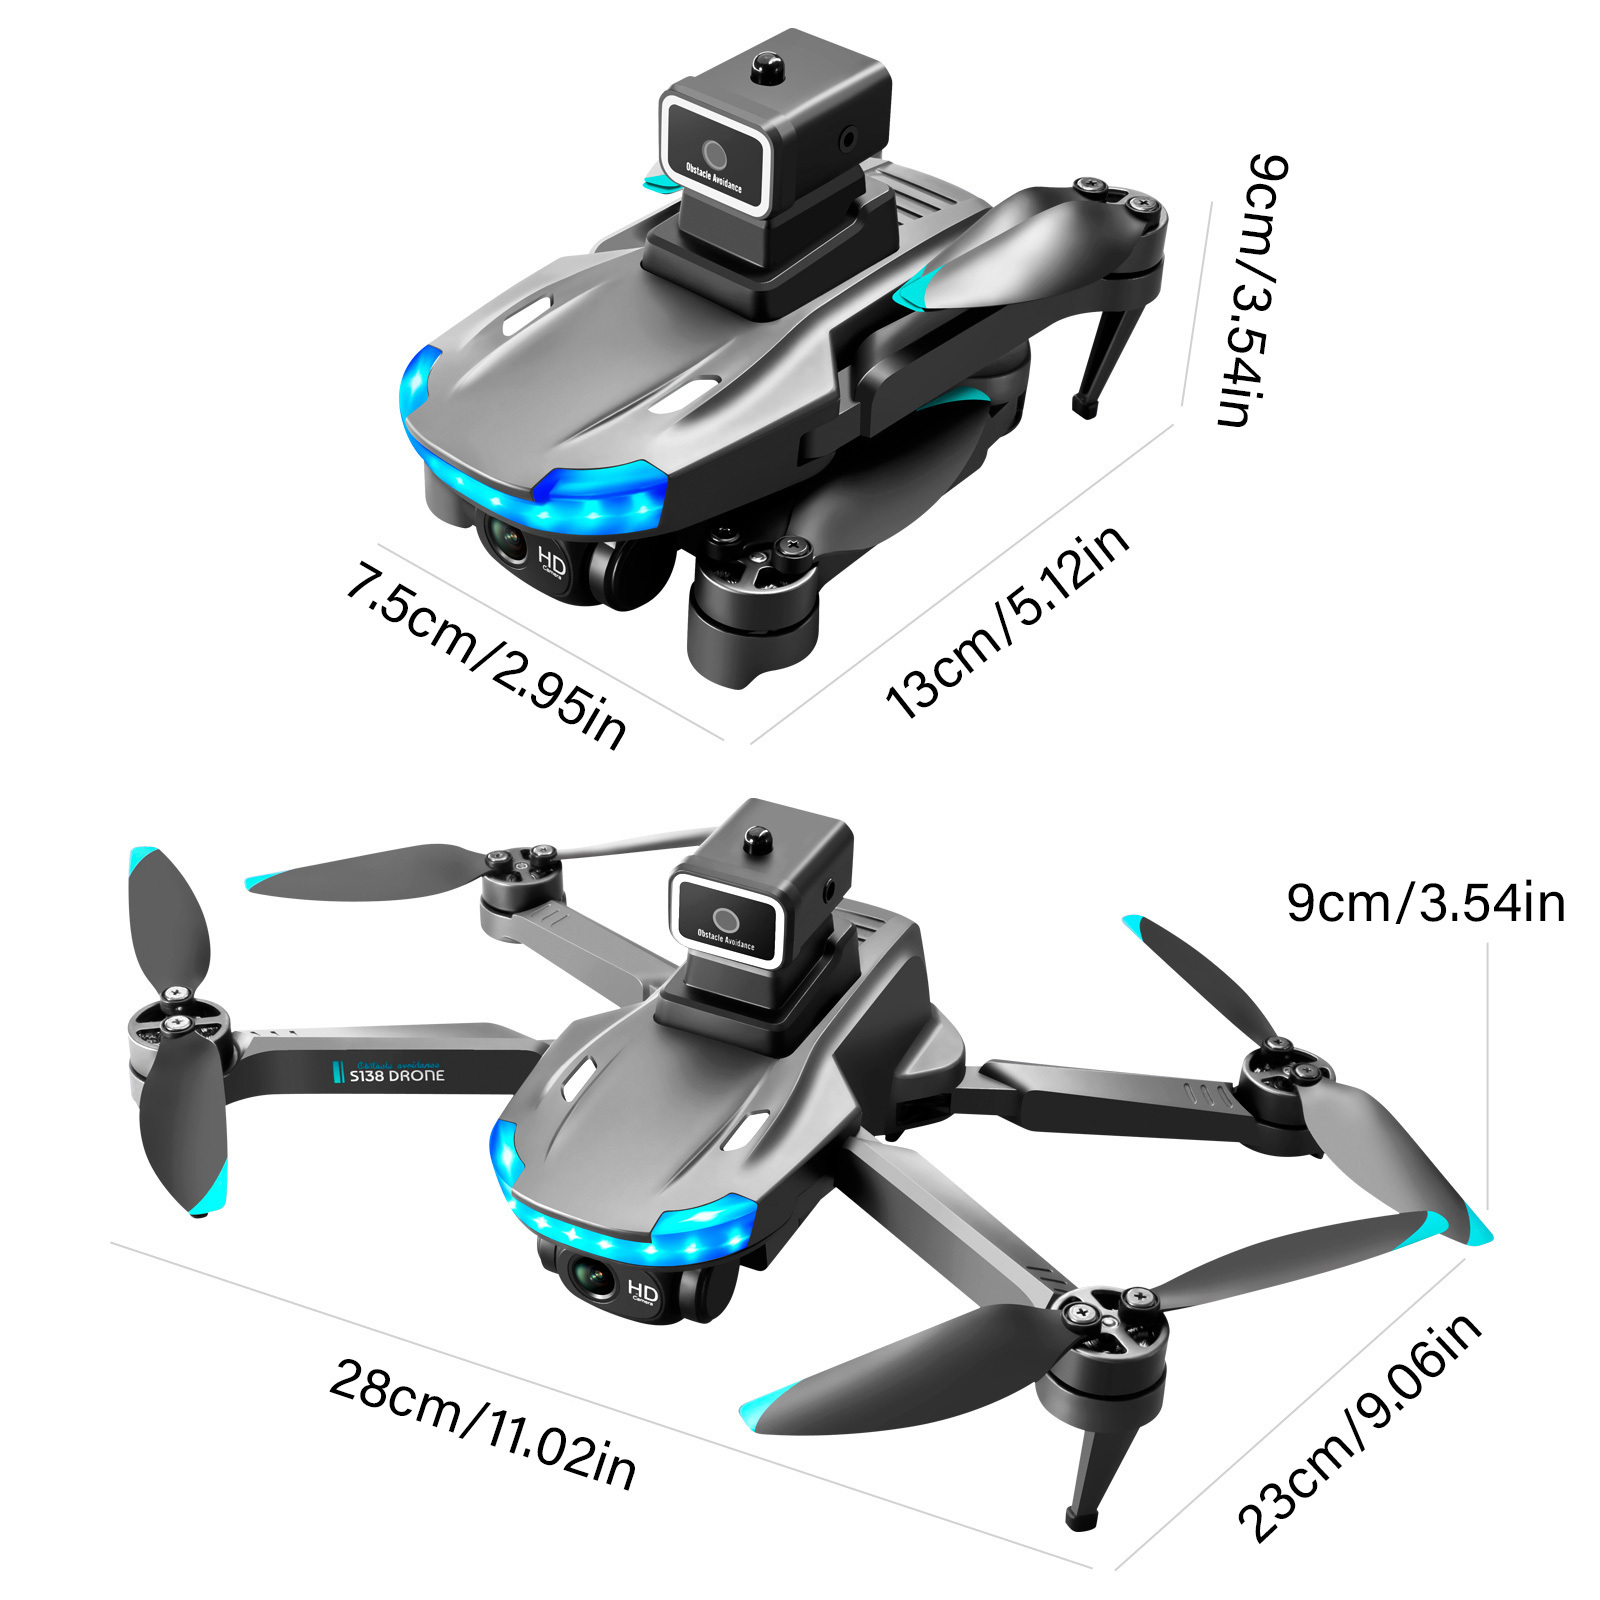 s138 foldable drone with auto avoid obstacles hd camera brushless motor live video gravity sensor gesture control optical flow positioning headless mode 3d flip rtf includes carrying bag details 18